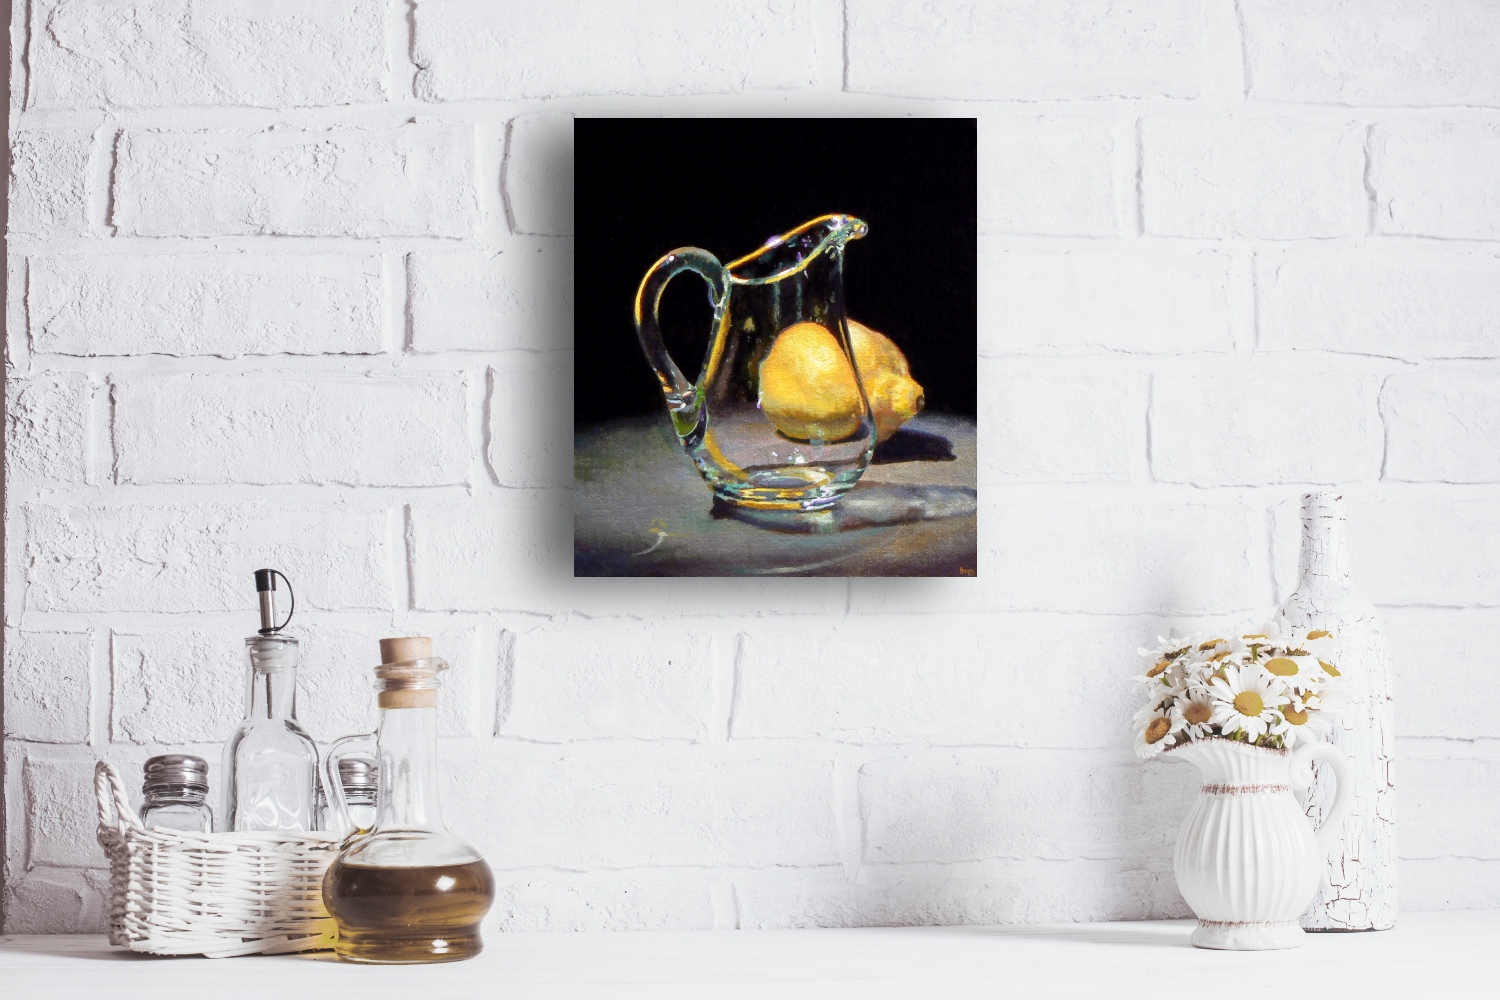 Gallery Wrapped Canvas Print